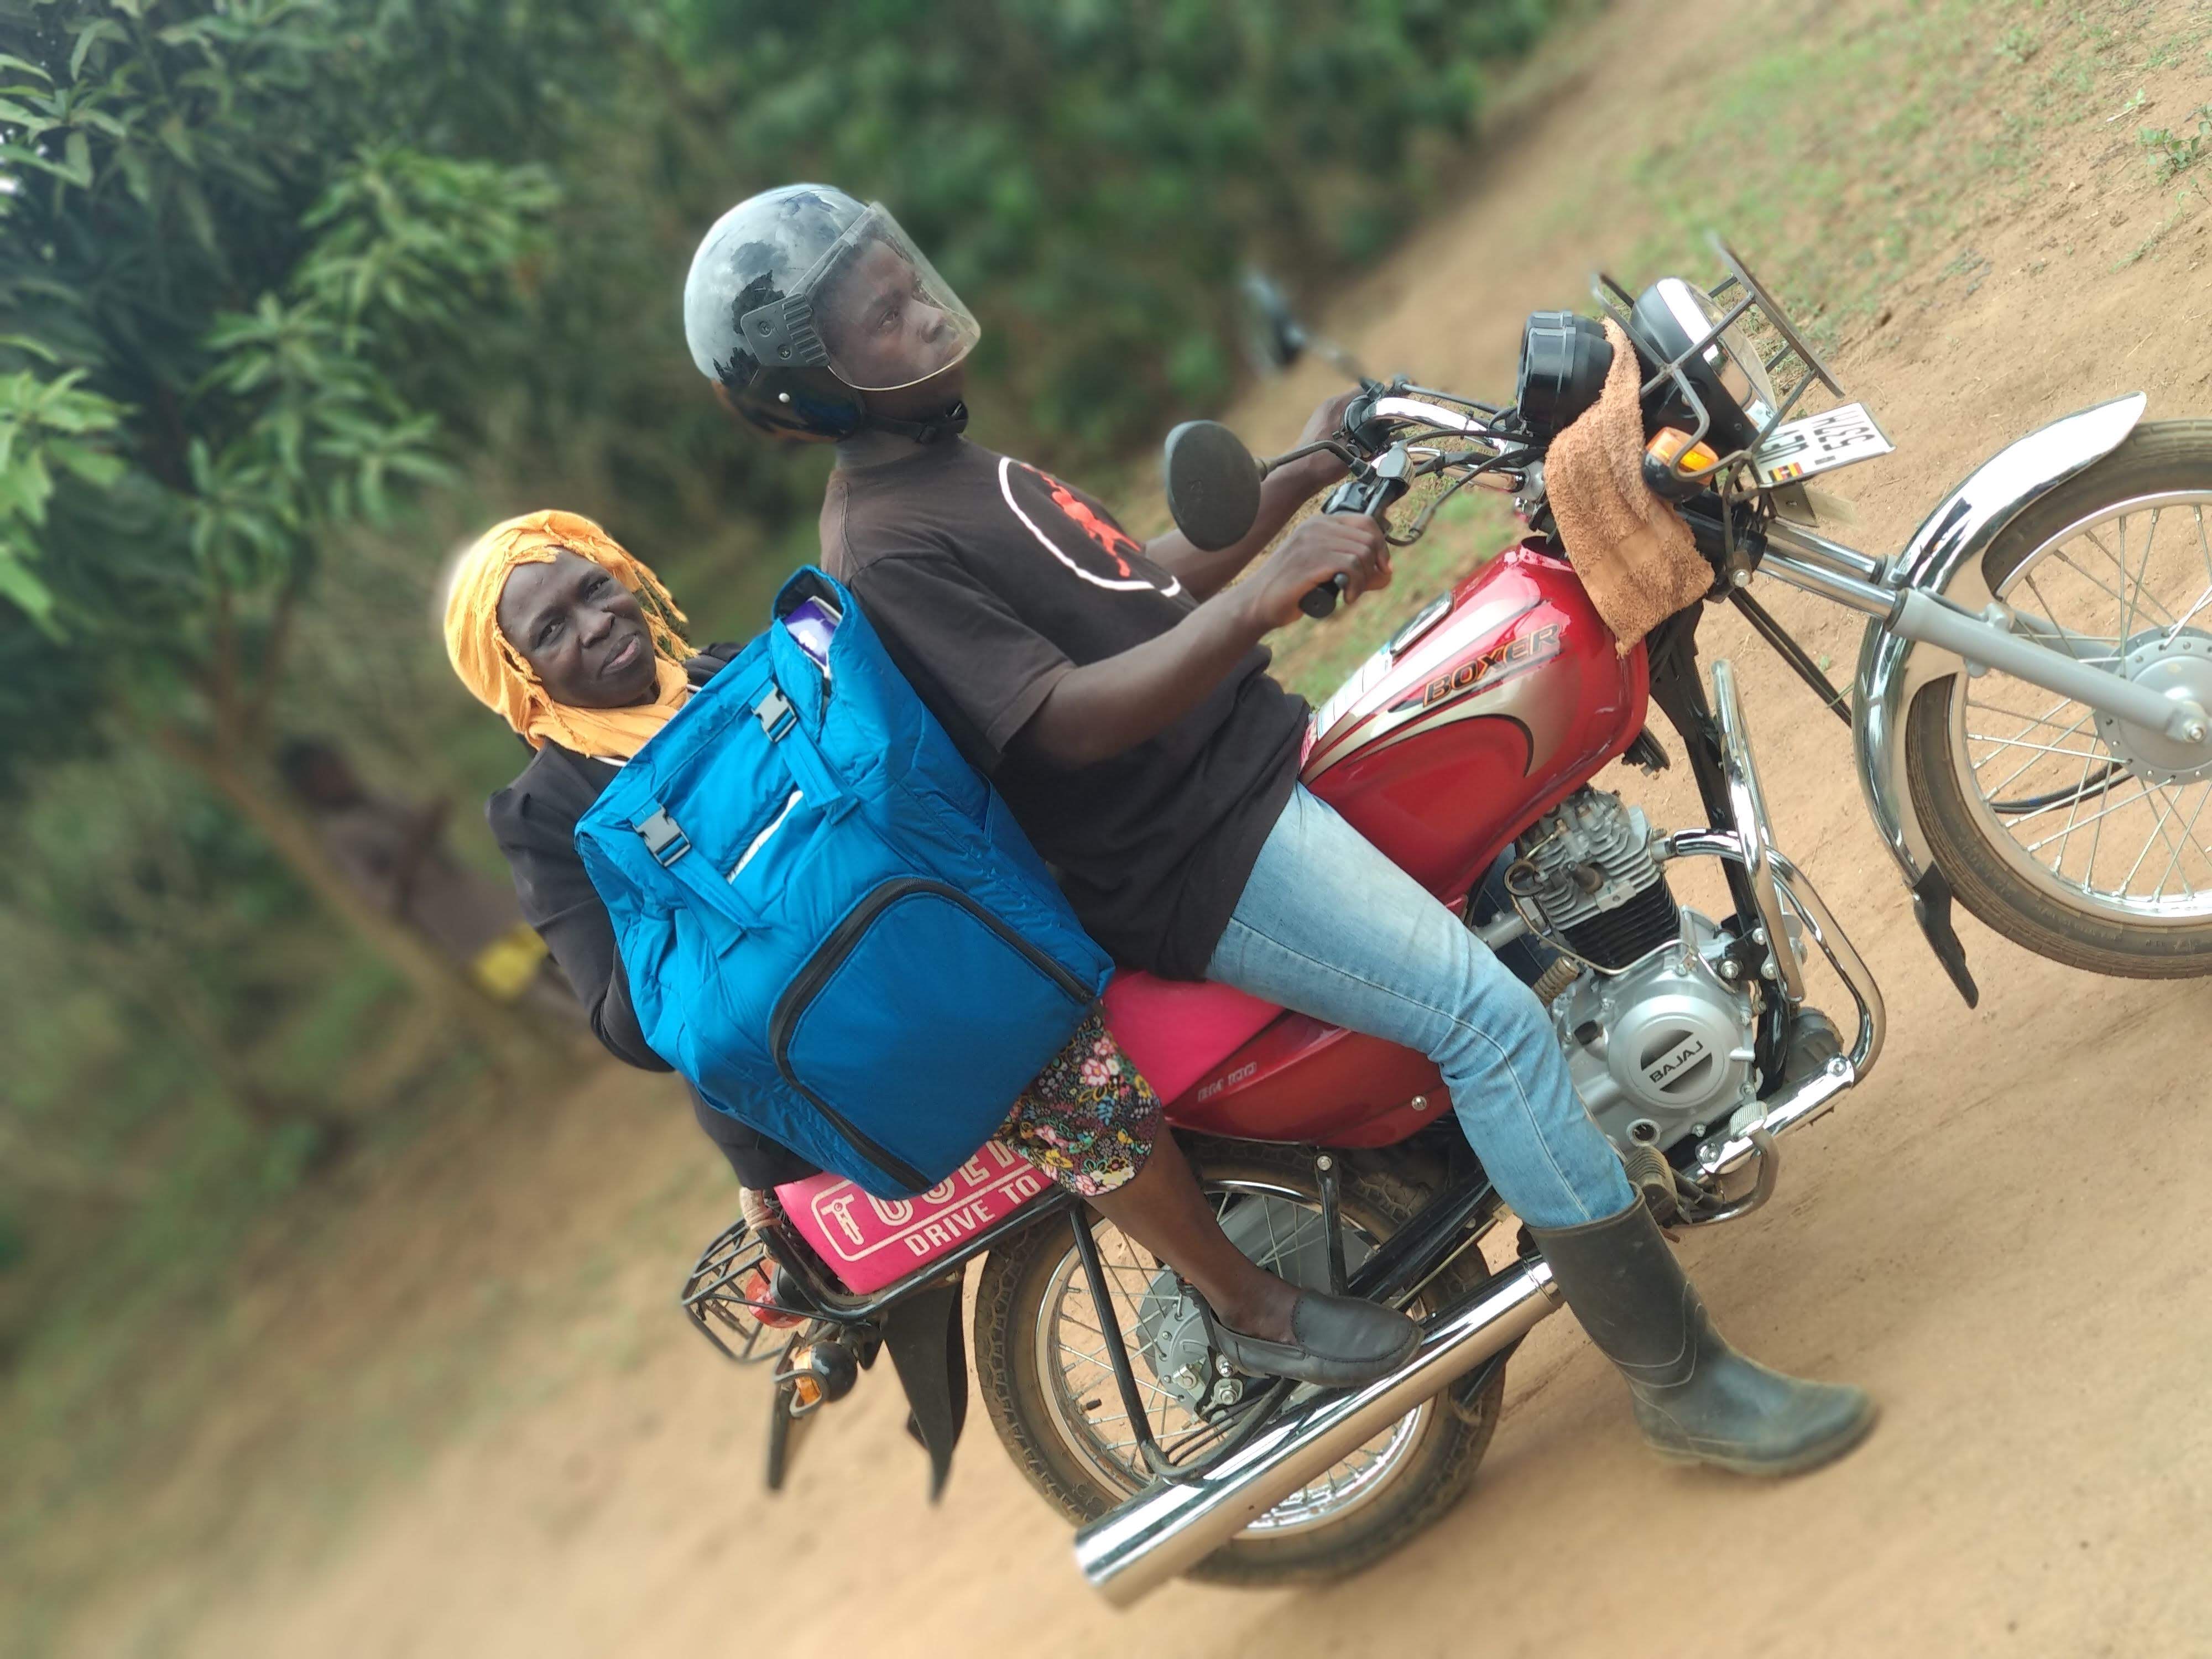 Two people on a motorcycle delivering vaccines in Uganda